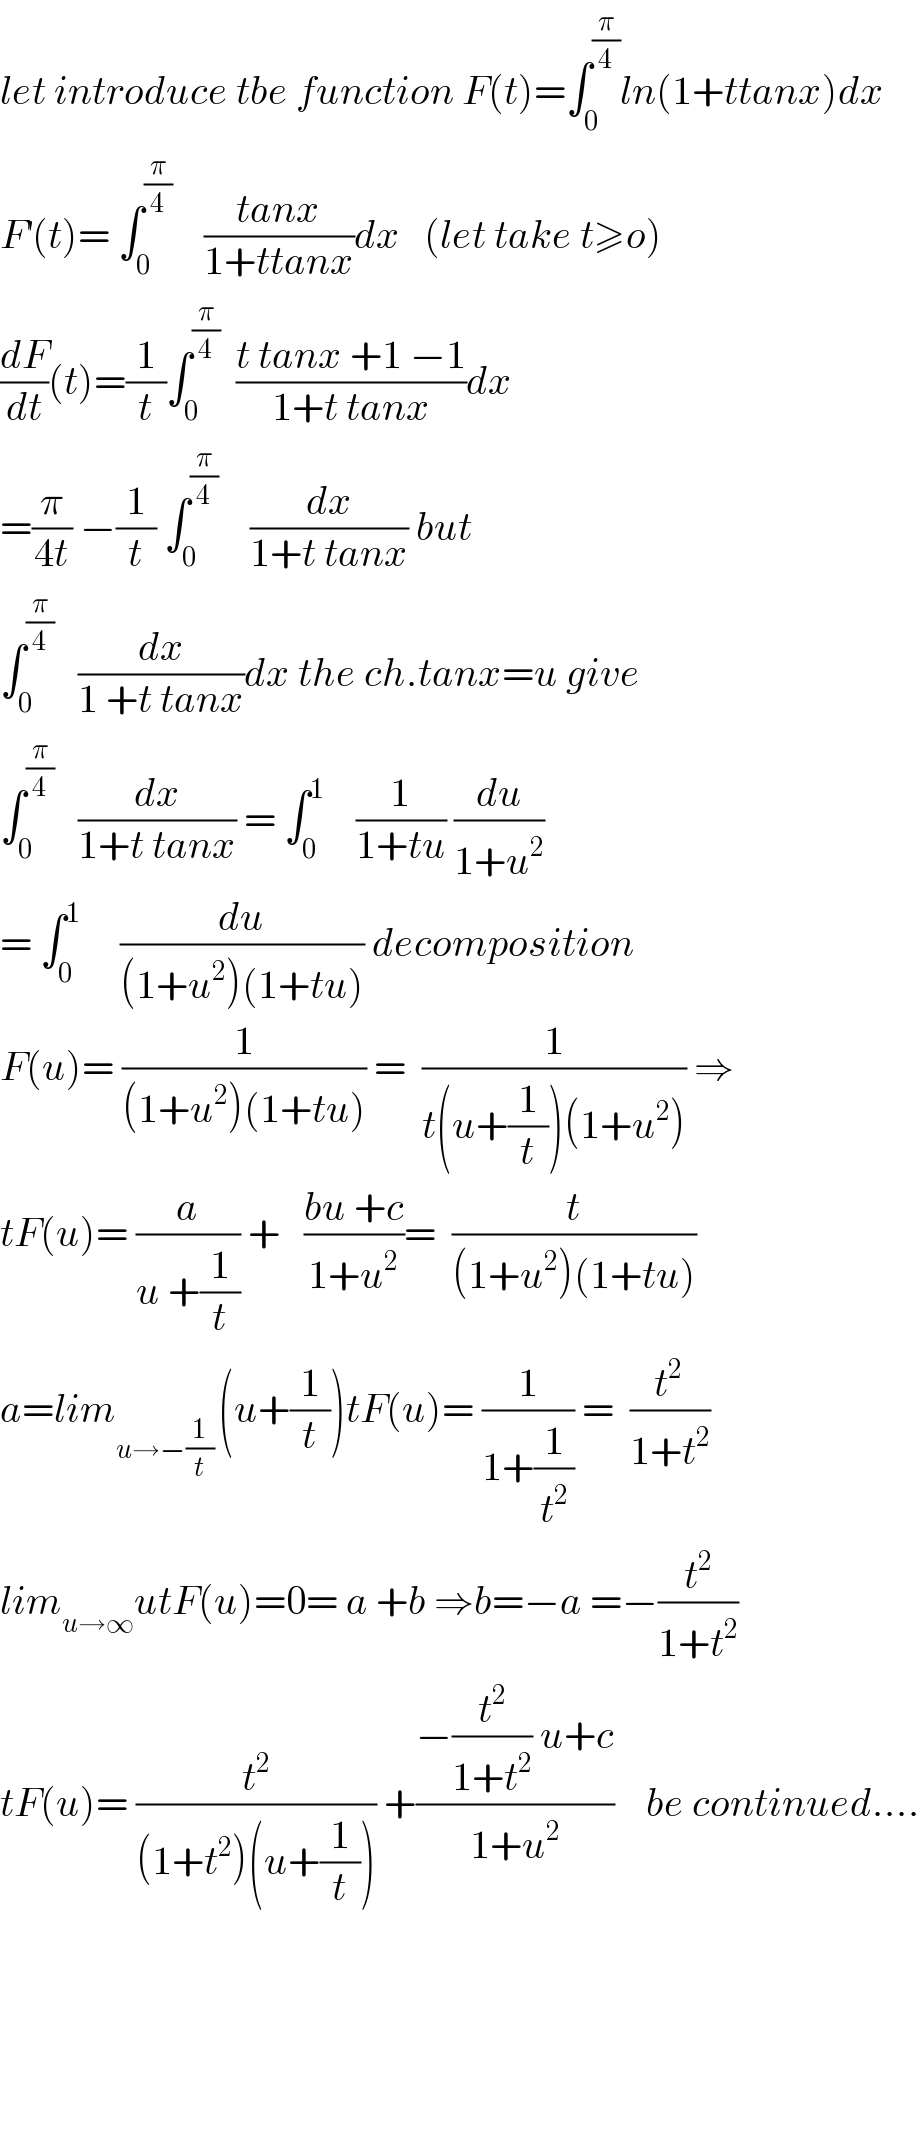 let introduce tbe function F(t)=∫_0 ^(π/4) ln(1+ttanx)dx  F^′ (t)= ∫_0 ^(π/4)     ((tanx)/(1+ttanx))dx   (let take t≥o)  (dF/dt)(t)=(1/t)∫_0 ^(π/4)   ((t tanx +1 −1)/(1+t tanx))dx  =(π/(4t)) −(1/t) ∫_0 ^(π/4)     (dx/(1+t tanx)) but  ∫_0 ^(π/4)    (dx/(1 +t tanx))dx the ch.tanx=u give  ∫_0 ^(π/4)    (dx/(1+t tanx)) = ∫_0 ^1     (1/(1+tu)) (du/(1+u^2 ))  = ∫_0 ^1      (du/((1+u^2 )(1+tu))) decomposition  F(u)= (1/((1+u^2 )(1+tu))) =  (1/(t(u+(1/t))(1+u^2 ))) ⇒  tF(u)= (a/(u +(1/t))) +   ((bu +c)/(1+u^2 ))=  (t/((1+u^2 )(1+tu)))  a=lim_(u→−(1/t) ) (u+(1/t))tF(u)= (1/(1+(1/t^2 ))) =  (t^(2 ) /(1+t^2 ))  lim_(u→∞) utF(u)=0= a +b ⇒b=−a =−(t^2 /(1+t^2 ))  tF(u)= (t^2 /((1+t^2 )(u+(1/t)))) +((−(t^2 /(1+t^2 )) u+c)/(1+u^2 ))    be continued....          